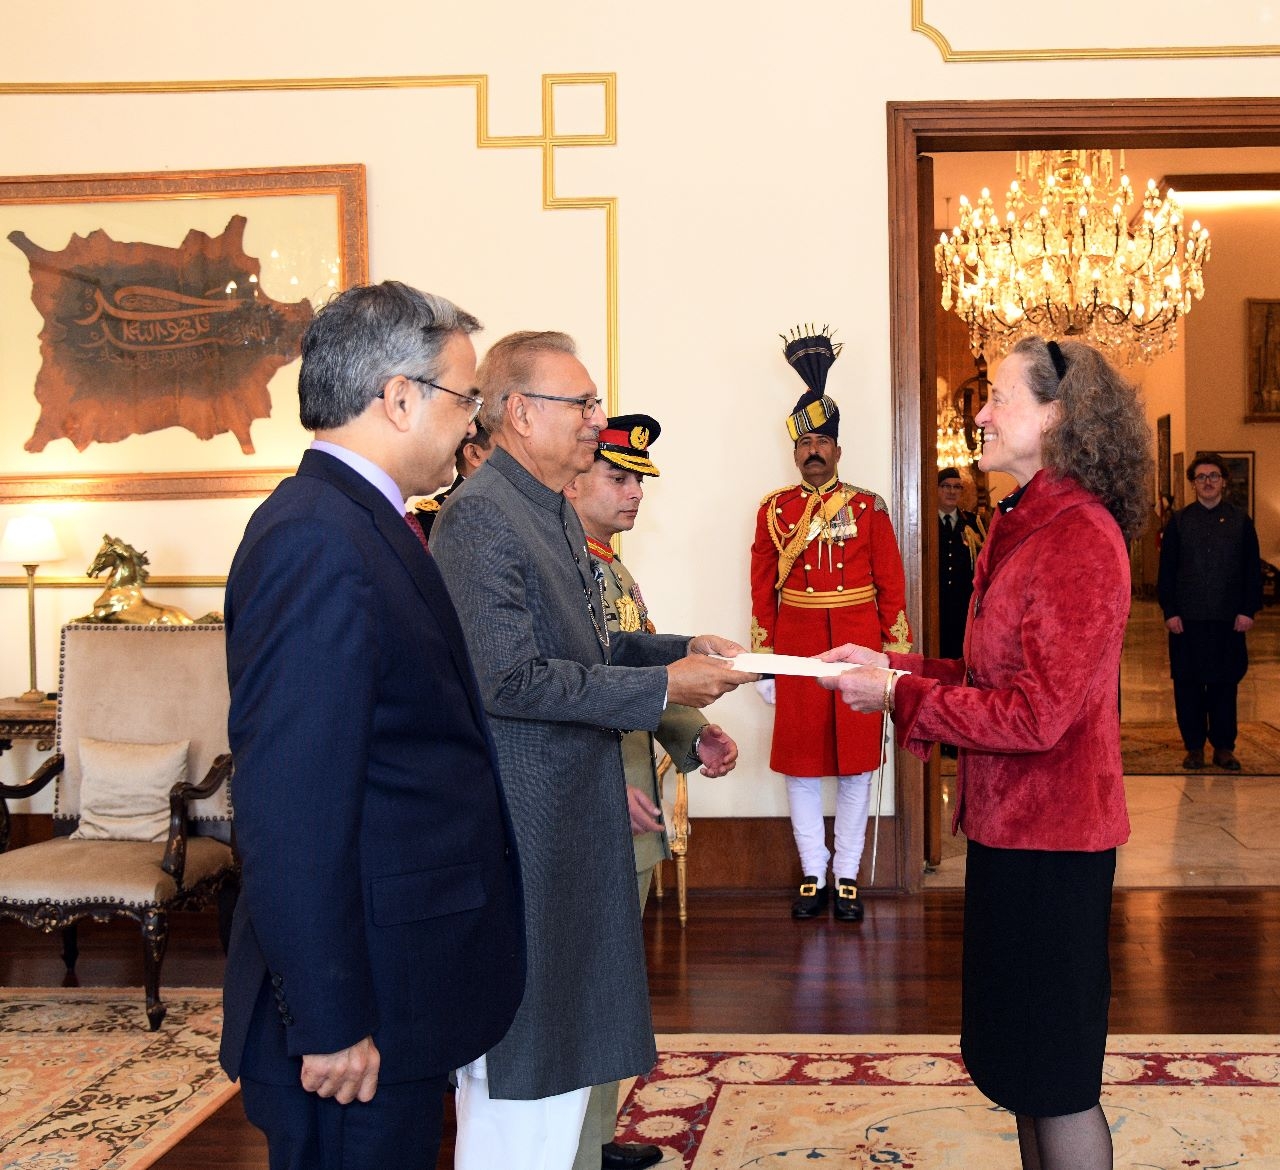 Envoys of Canada, Austria, others present credentials to president